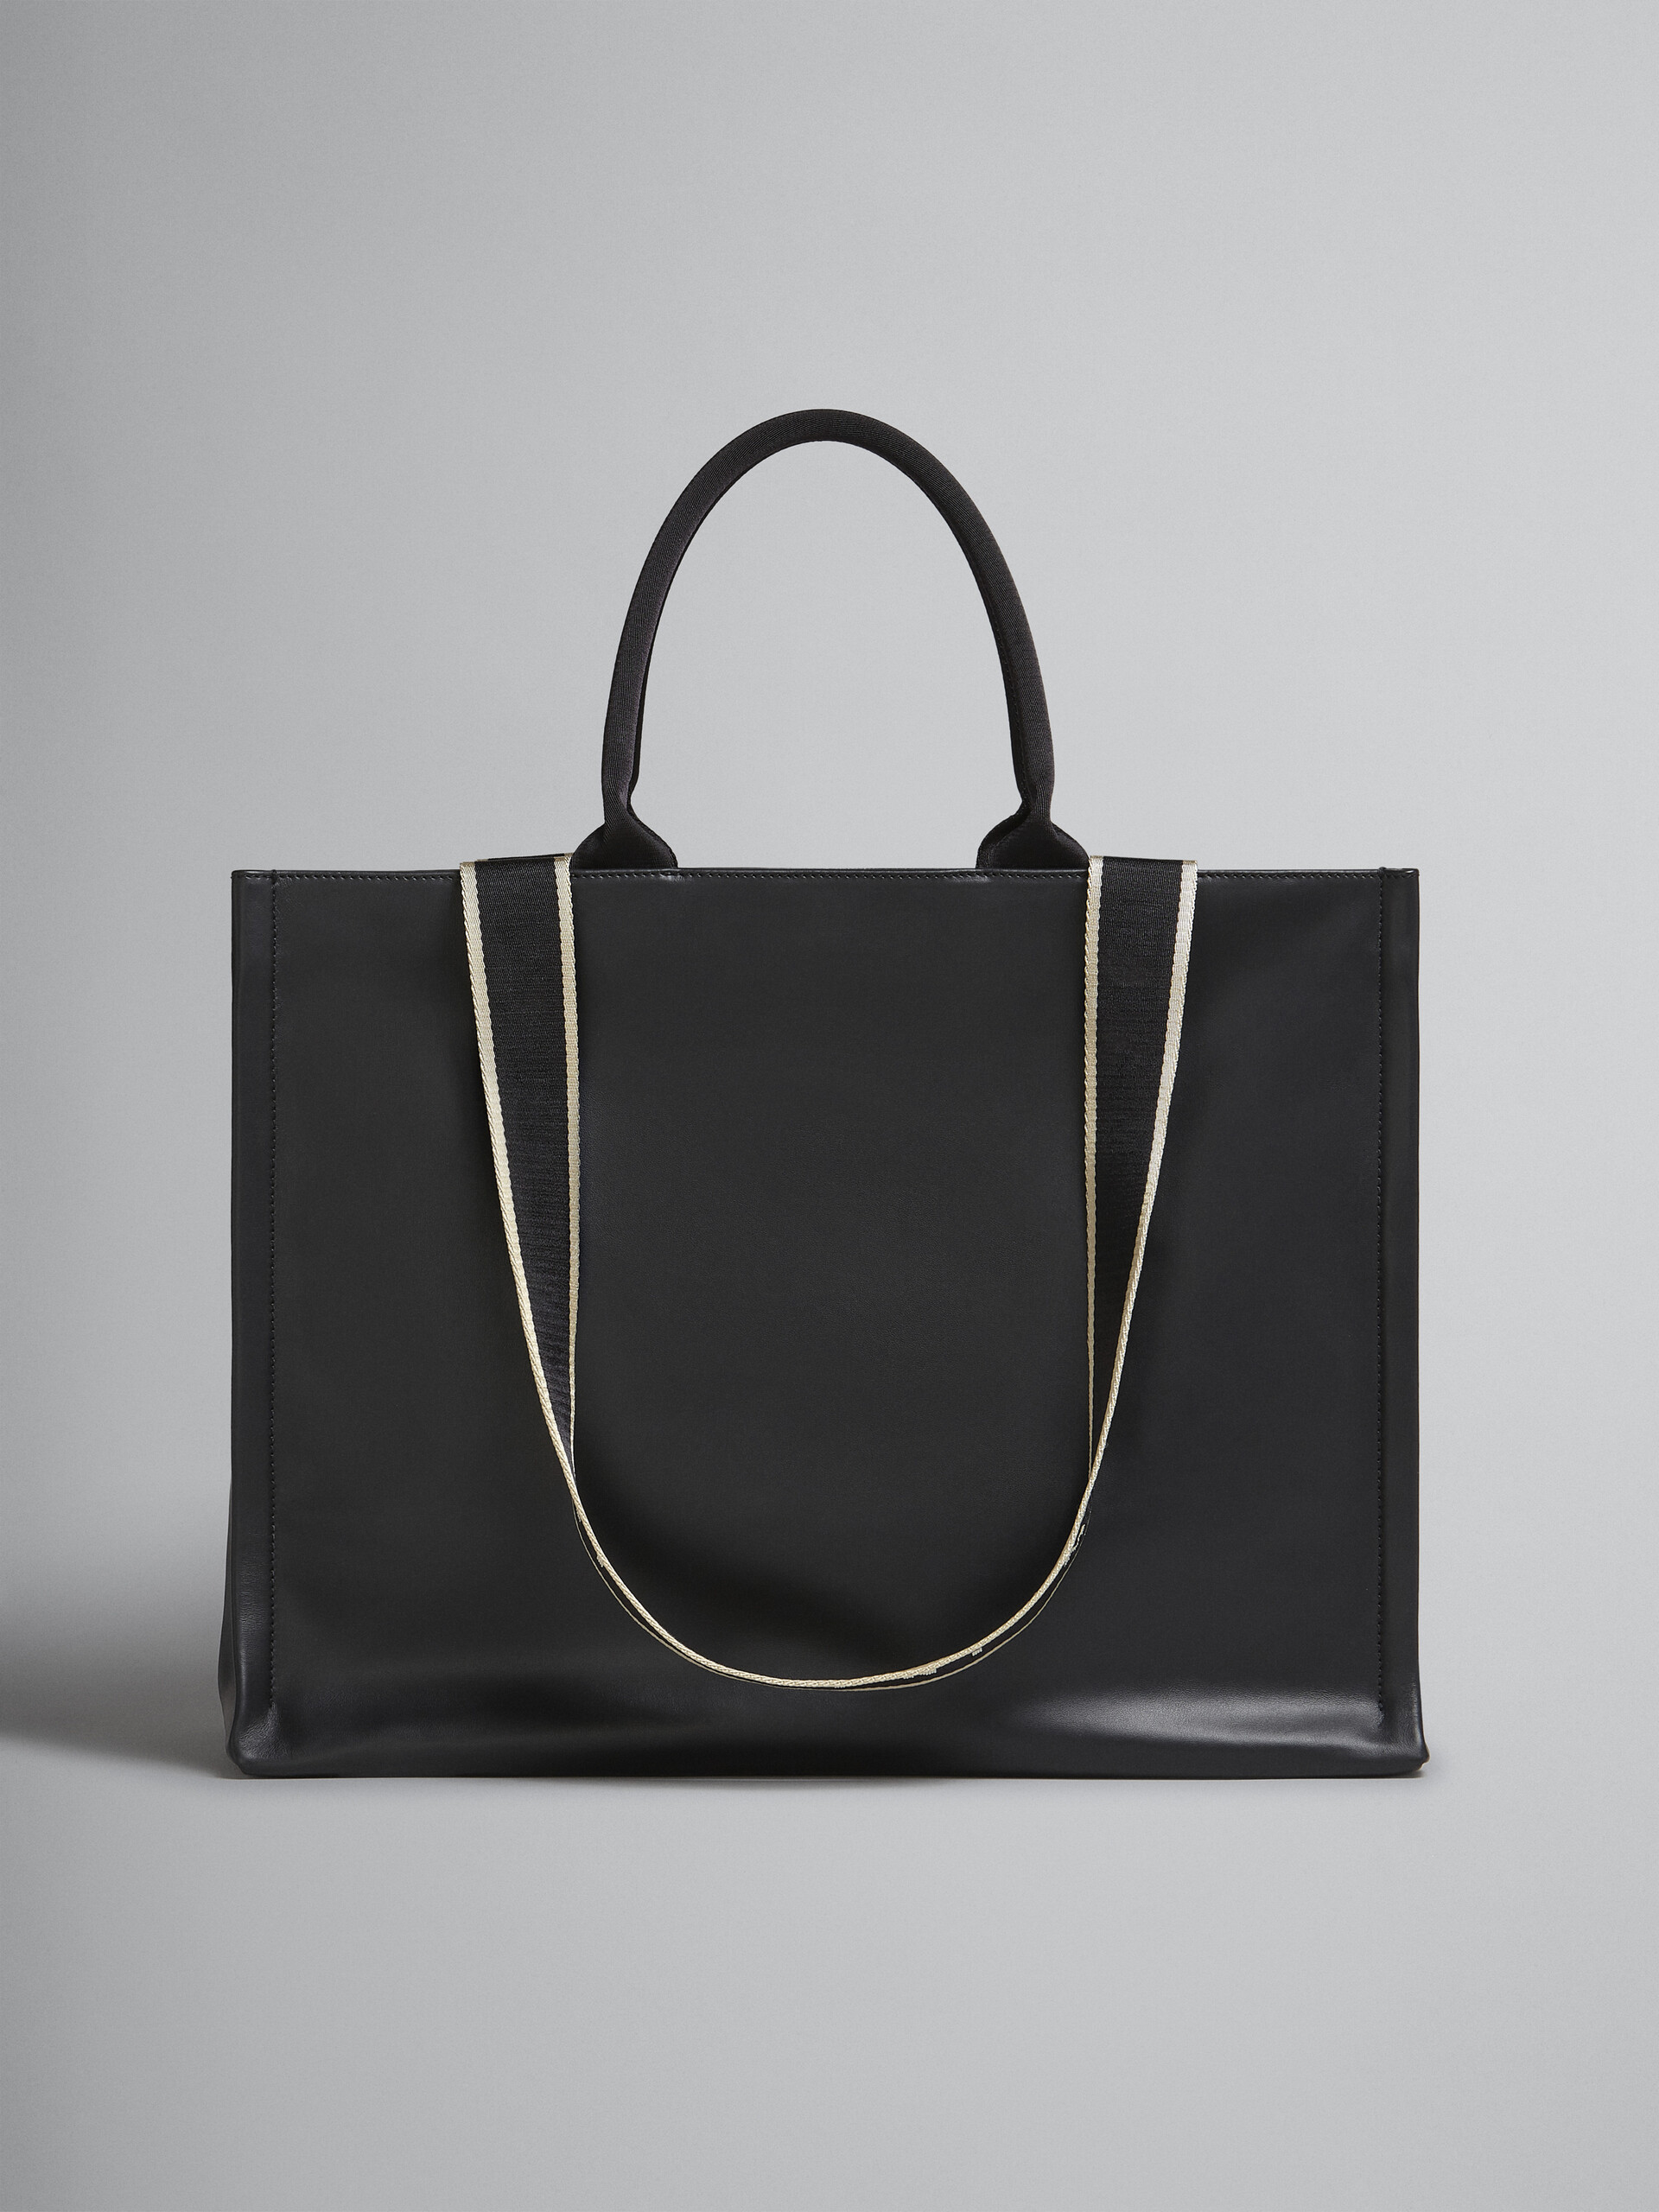 Bey Tote Bag in black leather - Shopping Bags - Image 1